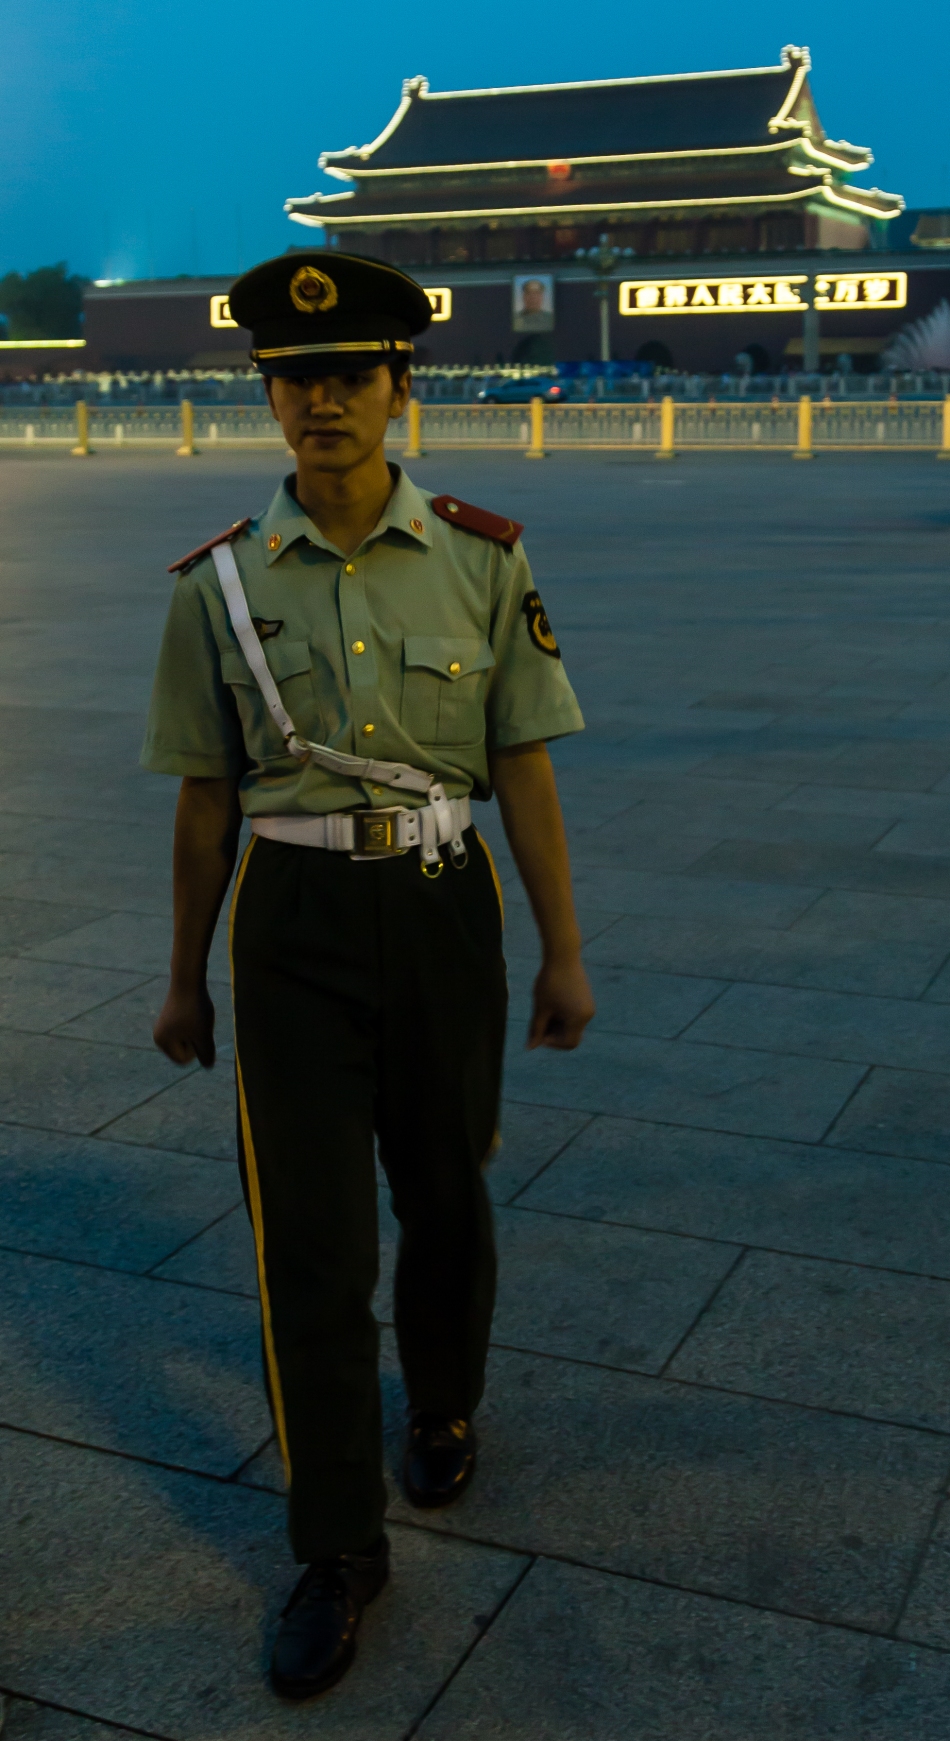 A police officer clearing the Tiananmen square in the evening.